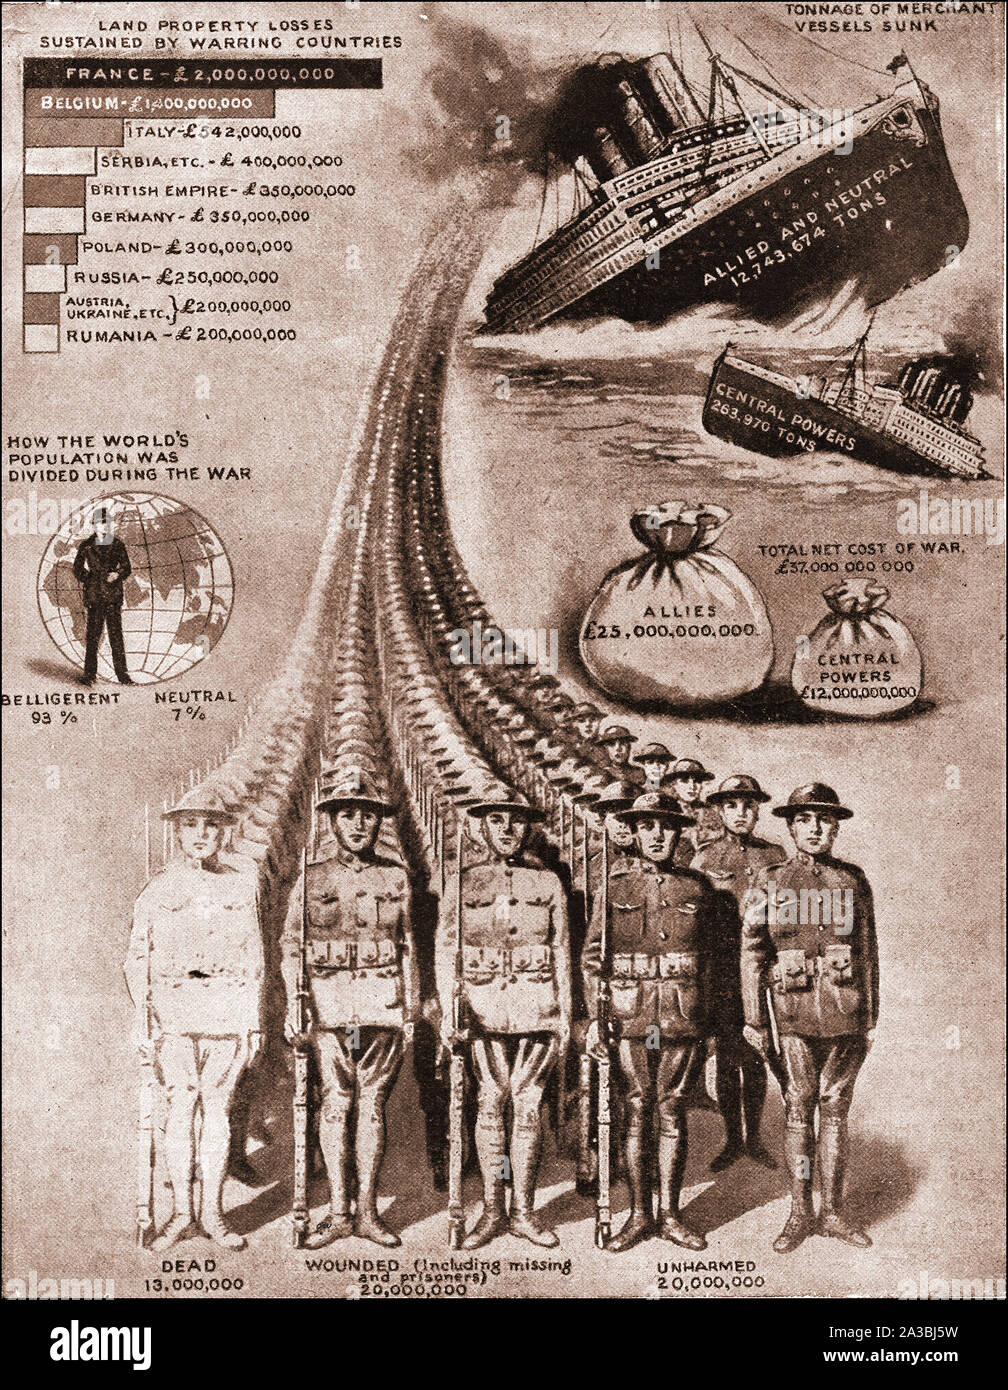 An early illustration graphically showing facts and figures detailing the cost of WWI in money, , losses, manpower, sunken vessels, and casualties. Stock Photo